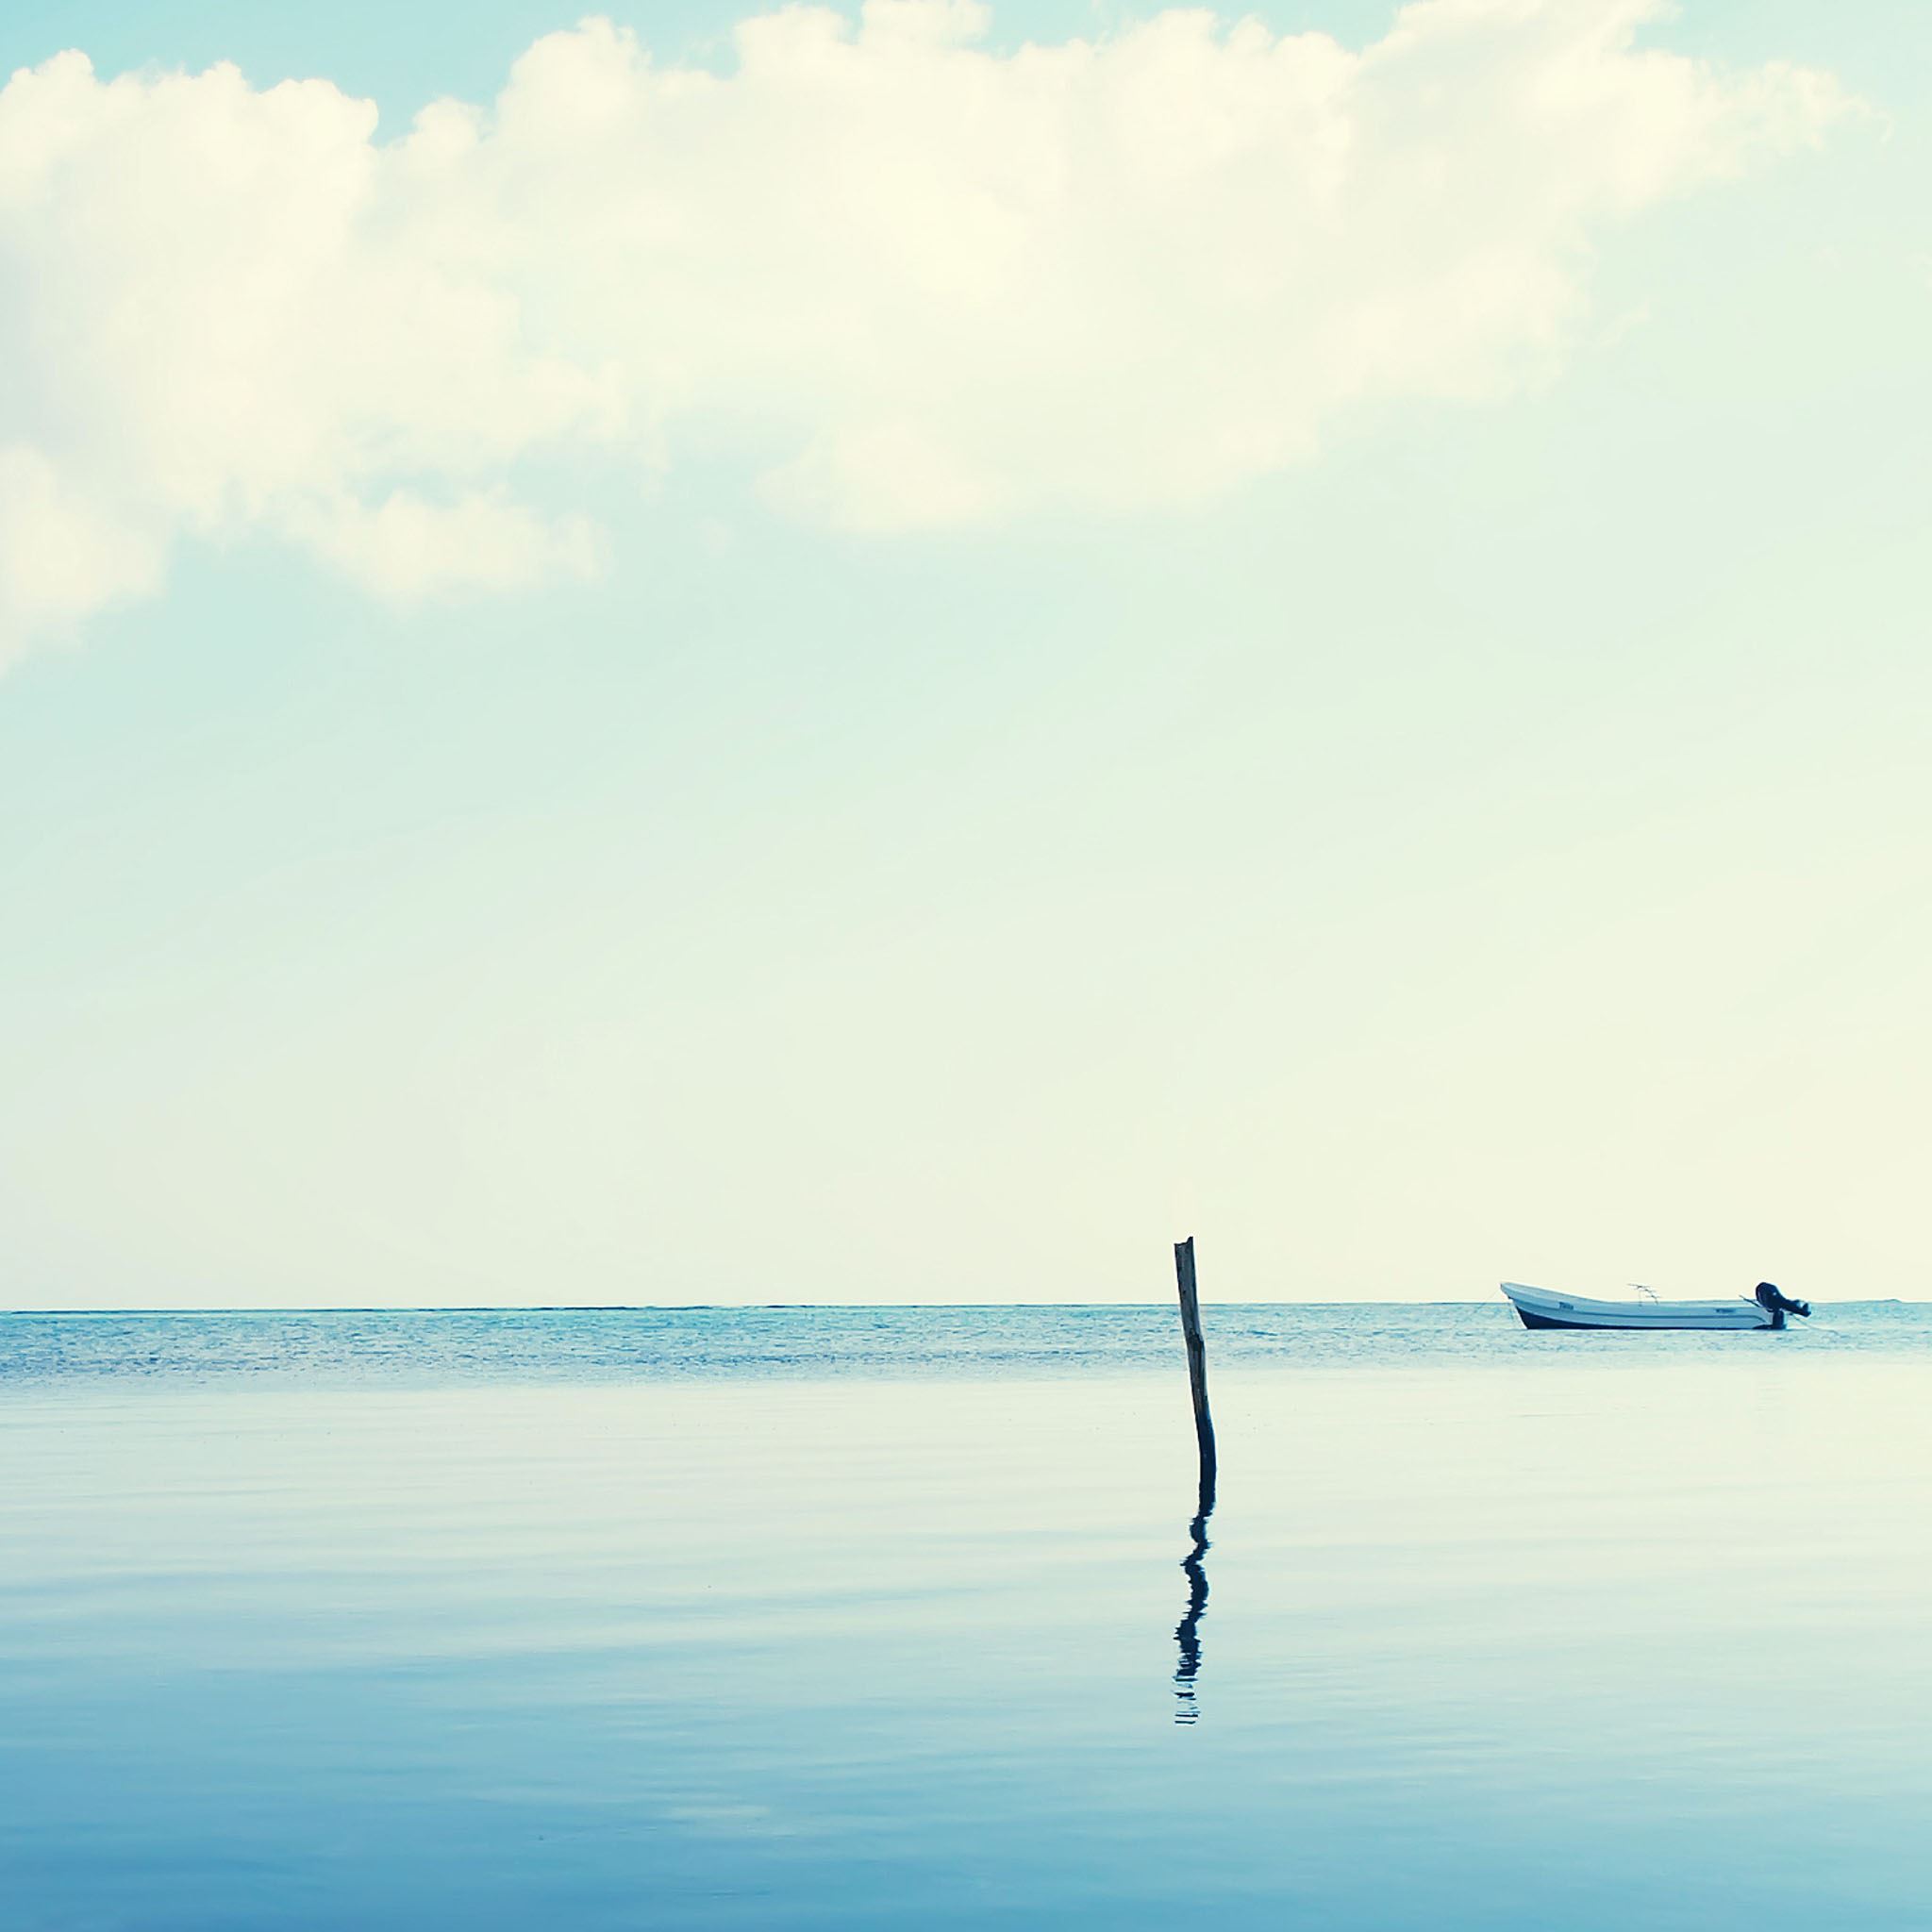 Nature Bright Peaceful Sea Skyline View Lonely Boat iPad Air wallpaper 